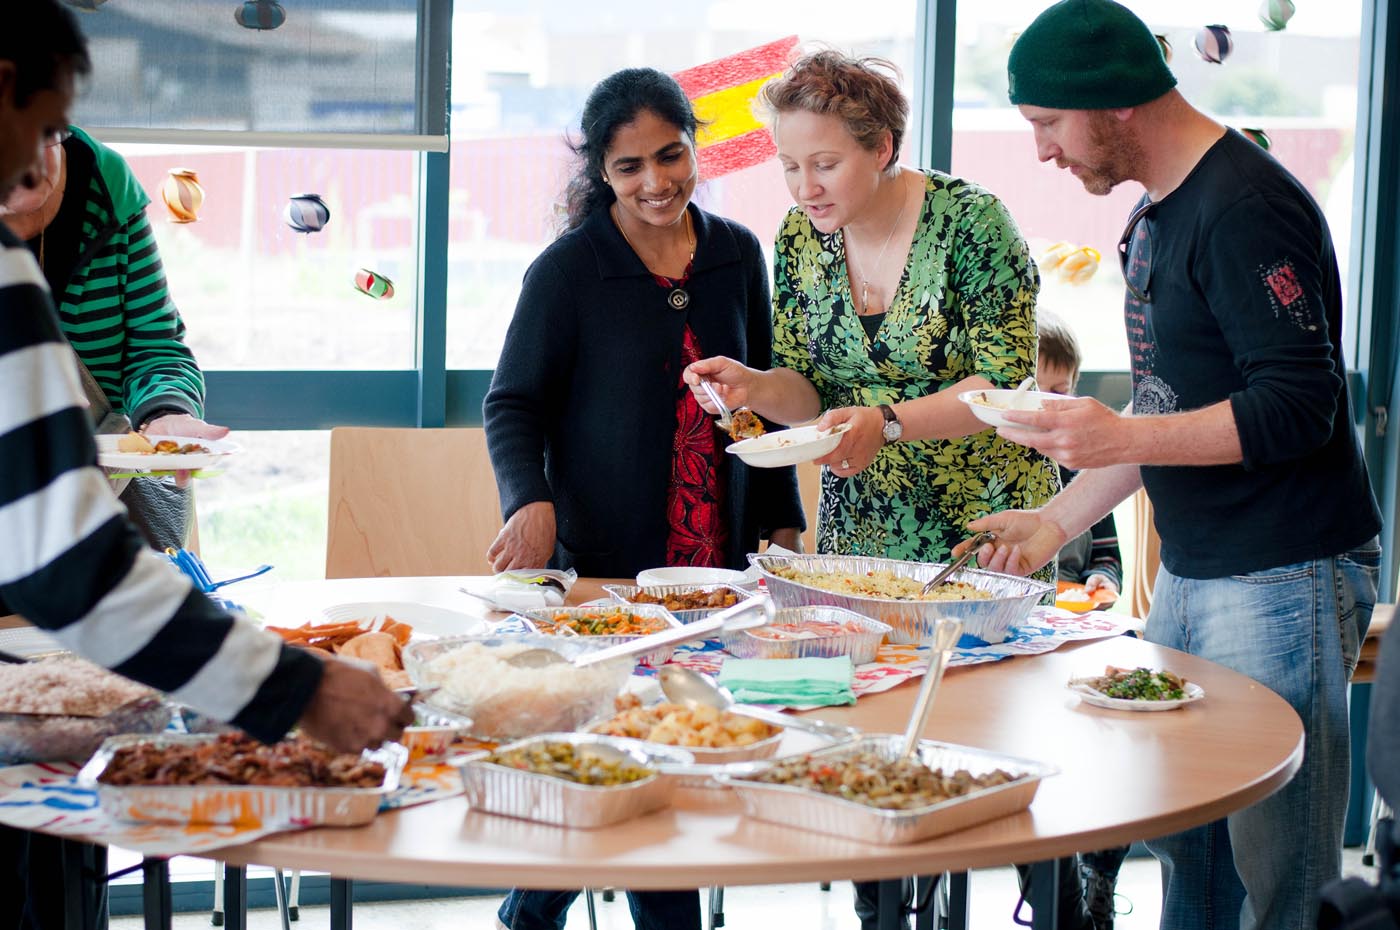 Photo of several people standing around a table helping themselves to food that is arranged in containers on the table - click to view larger image